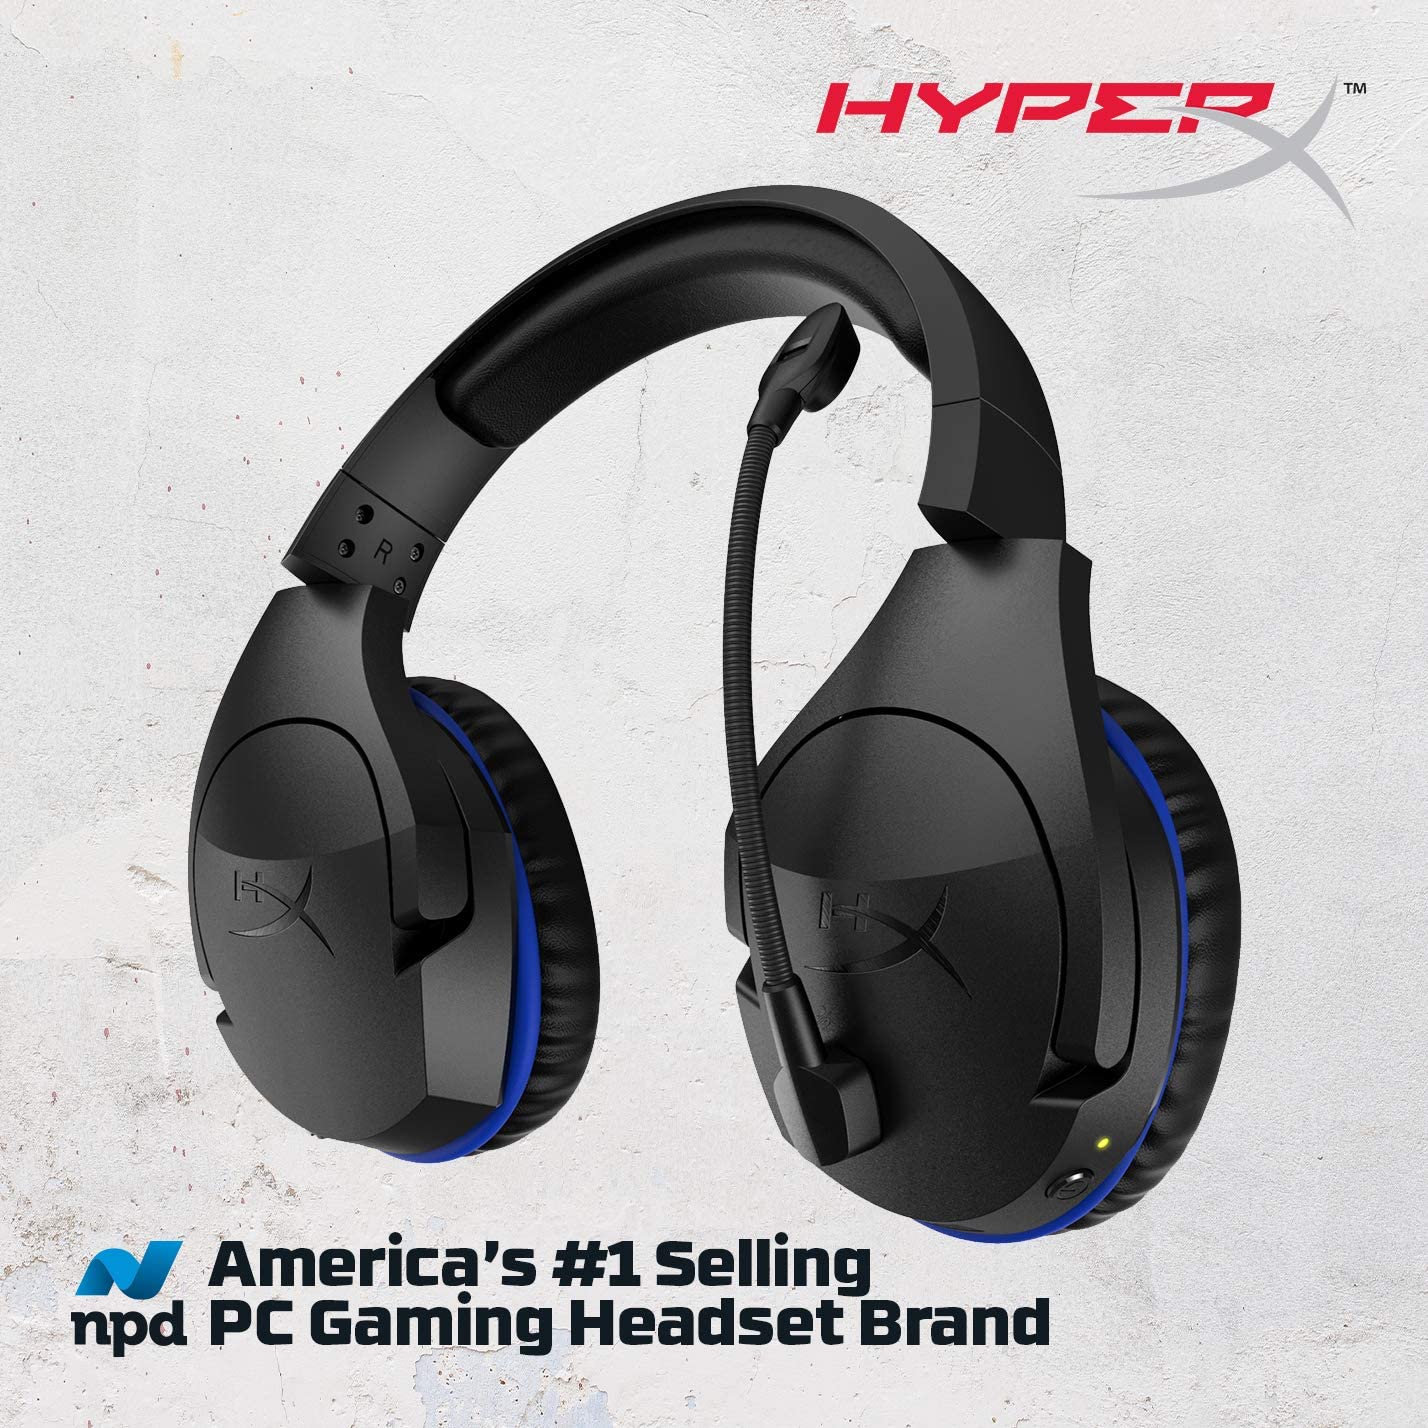 HyperX Cloud Stinger Wireless Gaming Headset for PS4 - Black